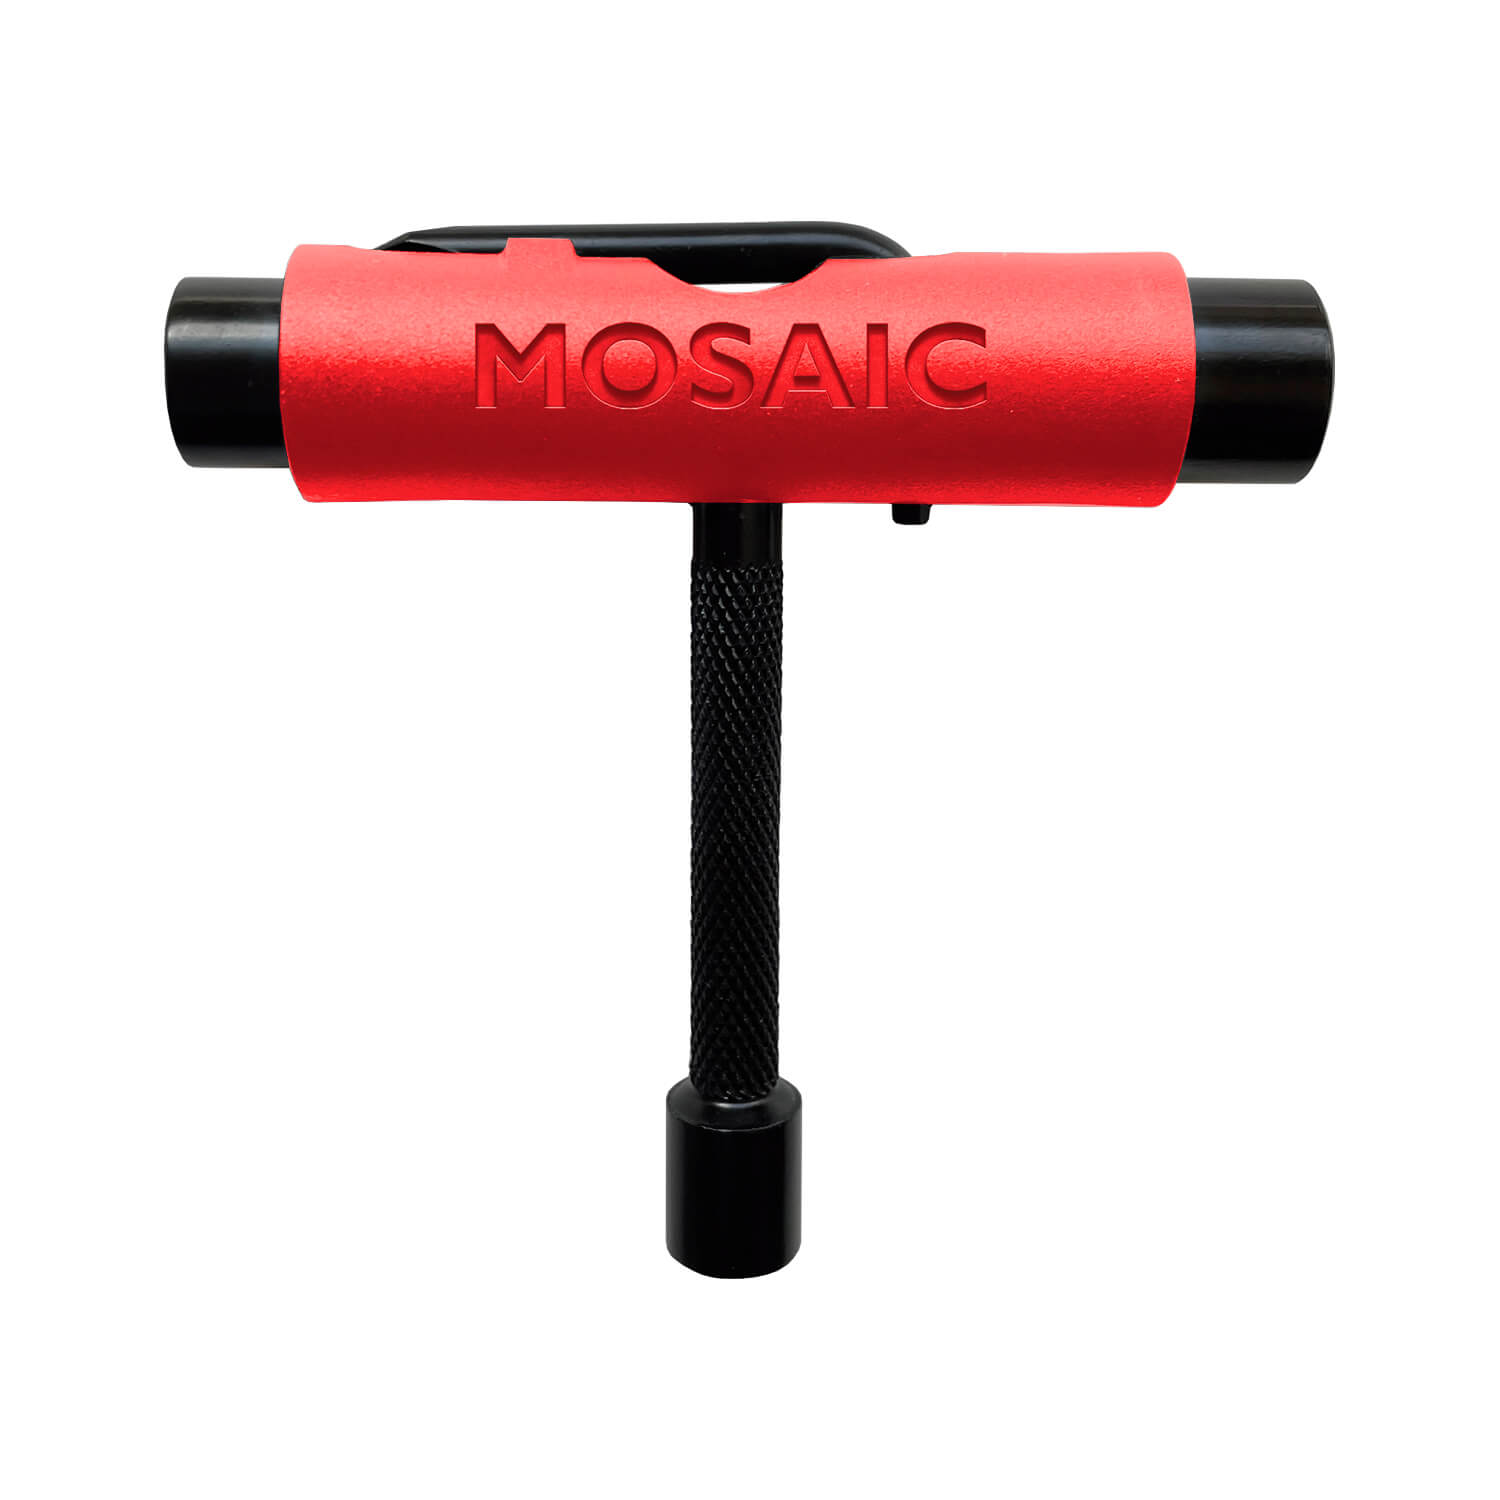 Mosaic T Tool 6 in 1 Red